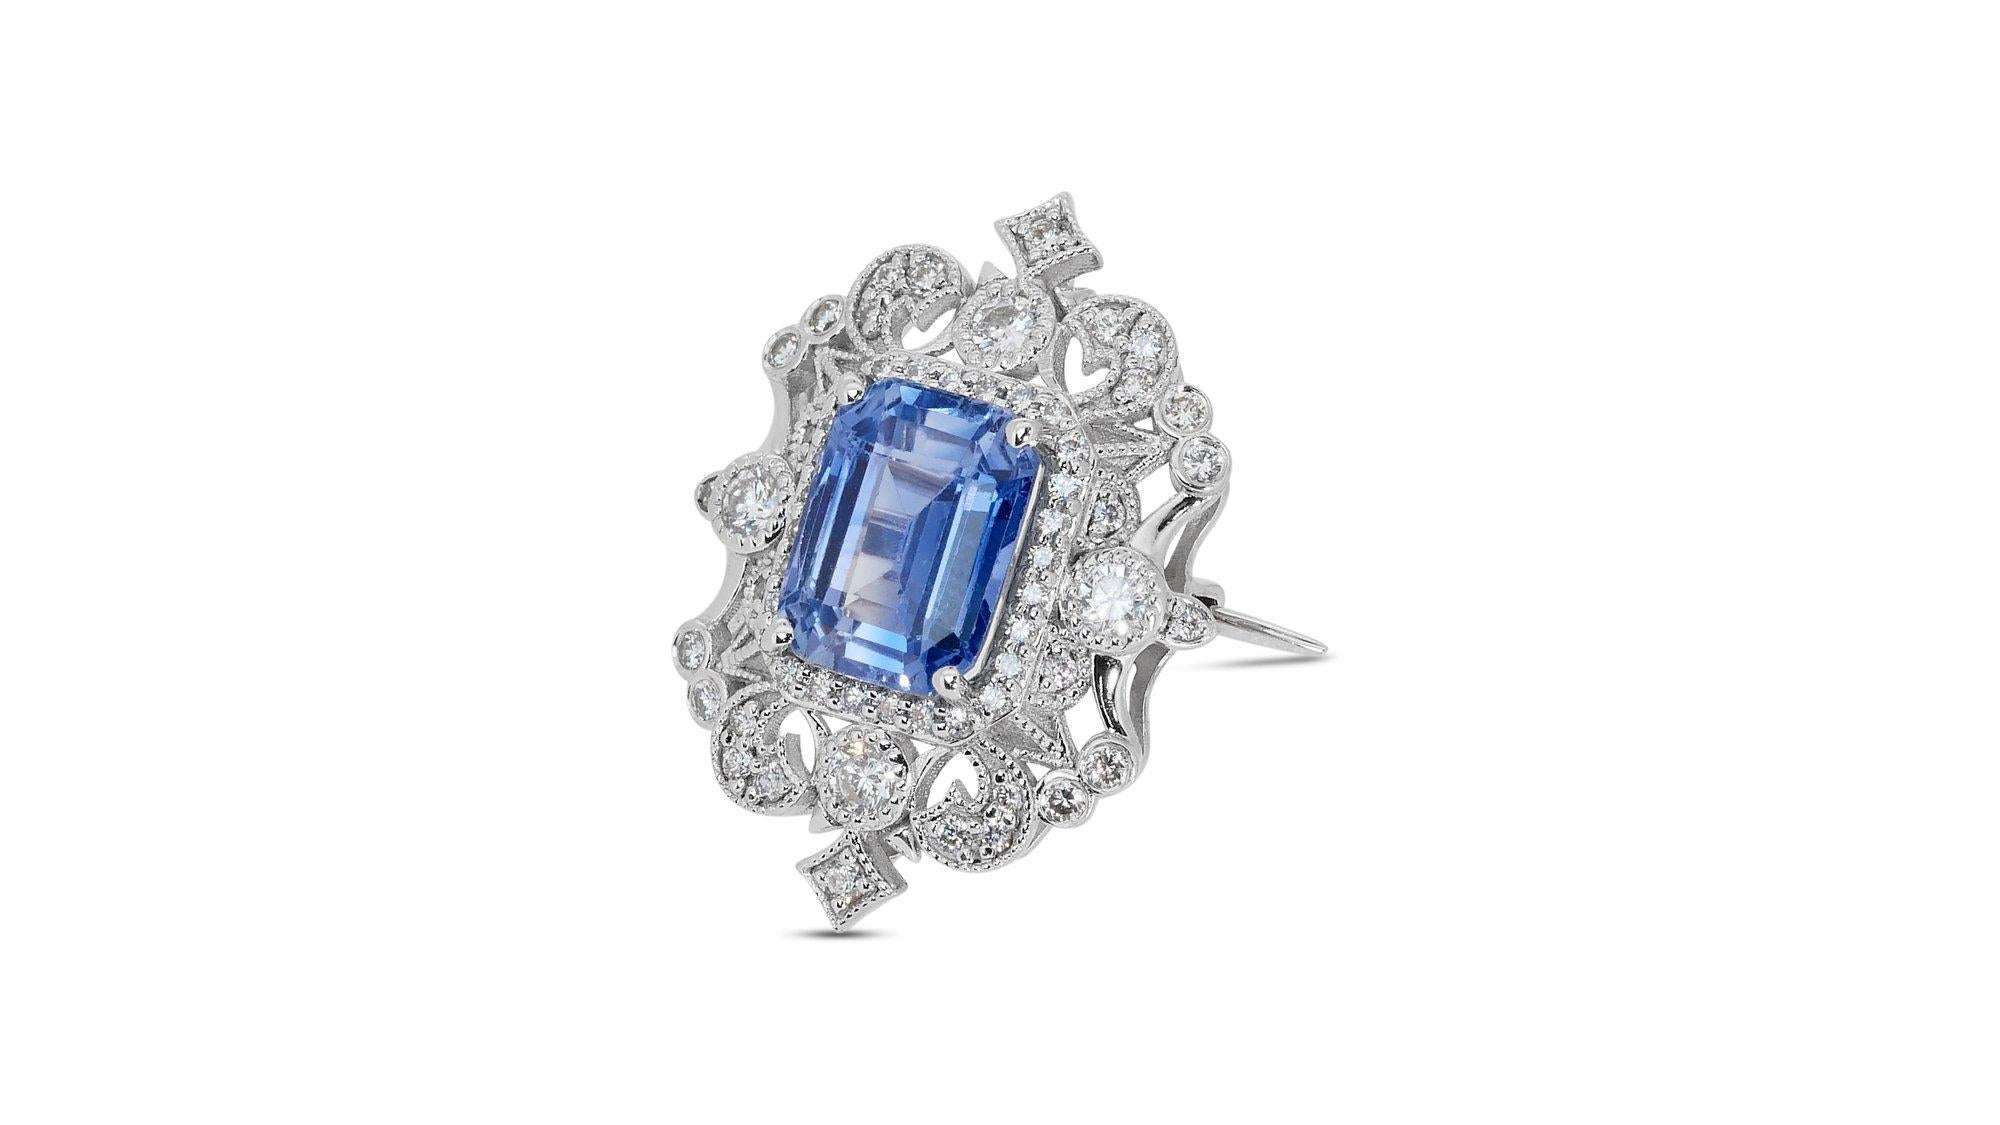 18k White Gold Brooch w/ 5.65 ct Sapphire and Natural Diamonds GIA Certificate In New Condition For Sale In רמת גן, IL